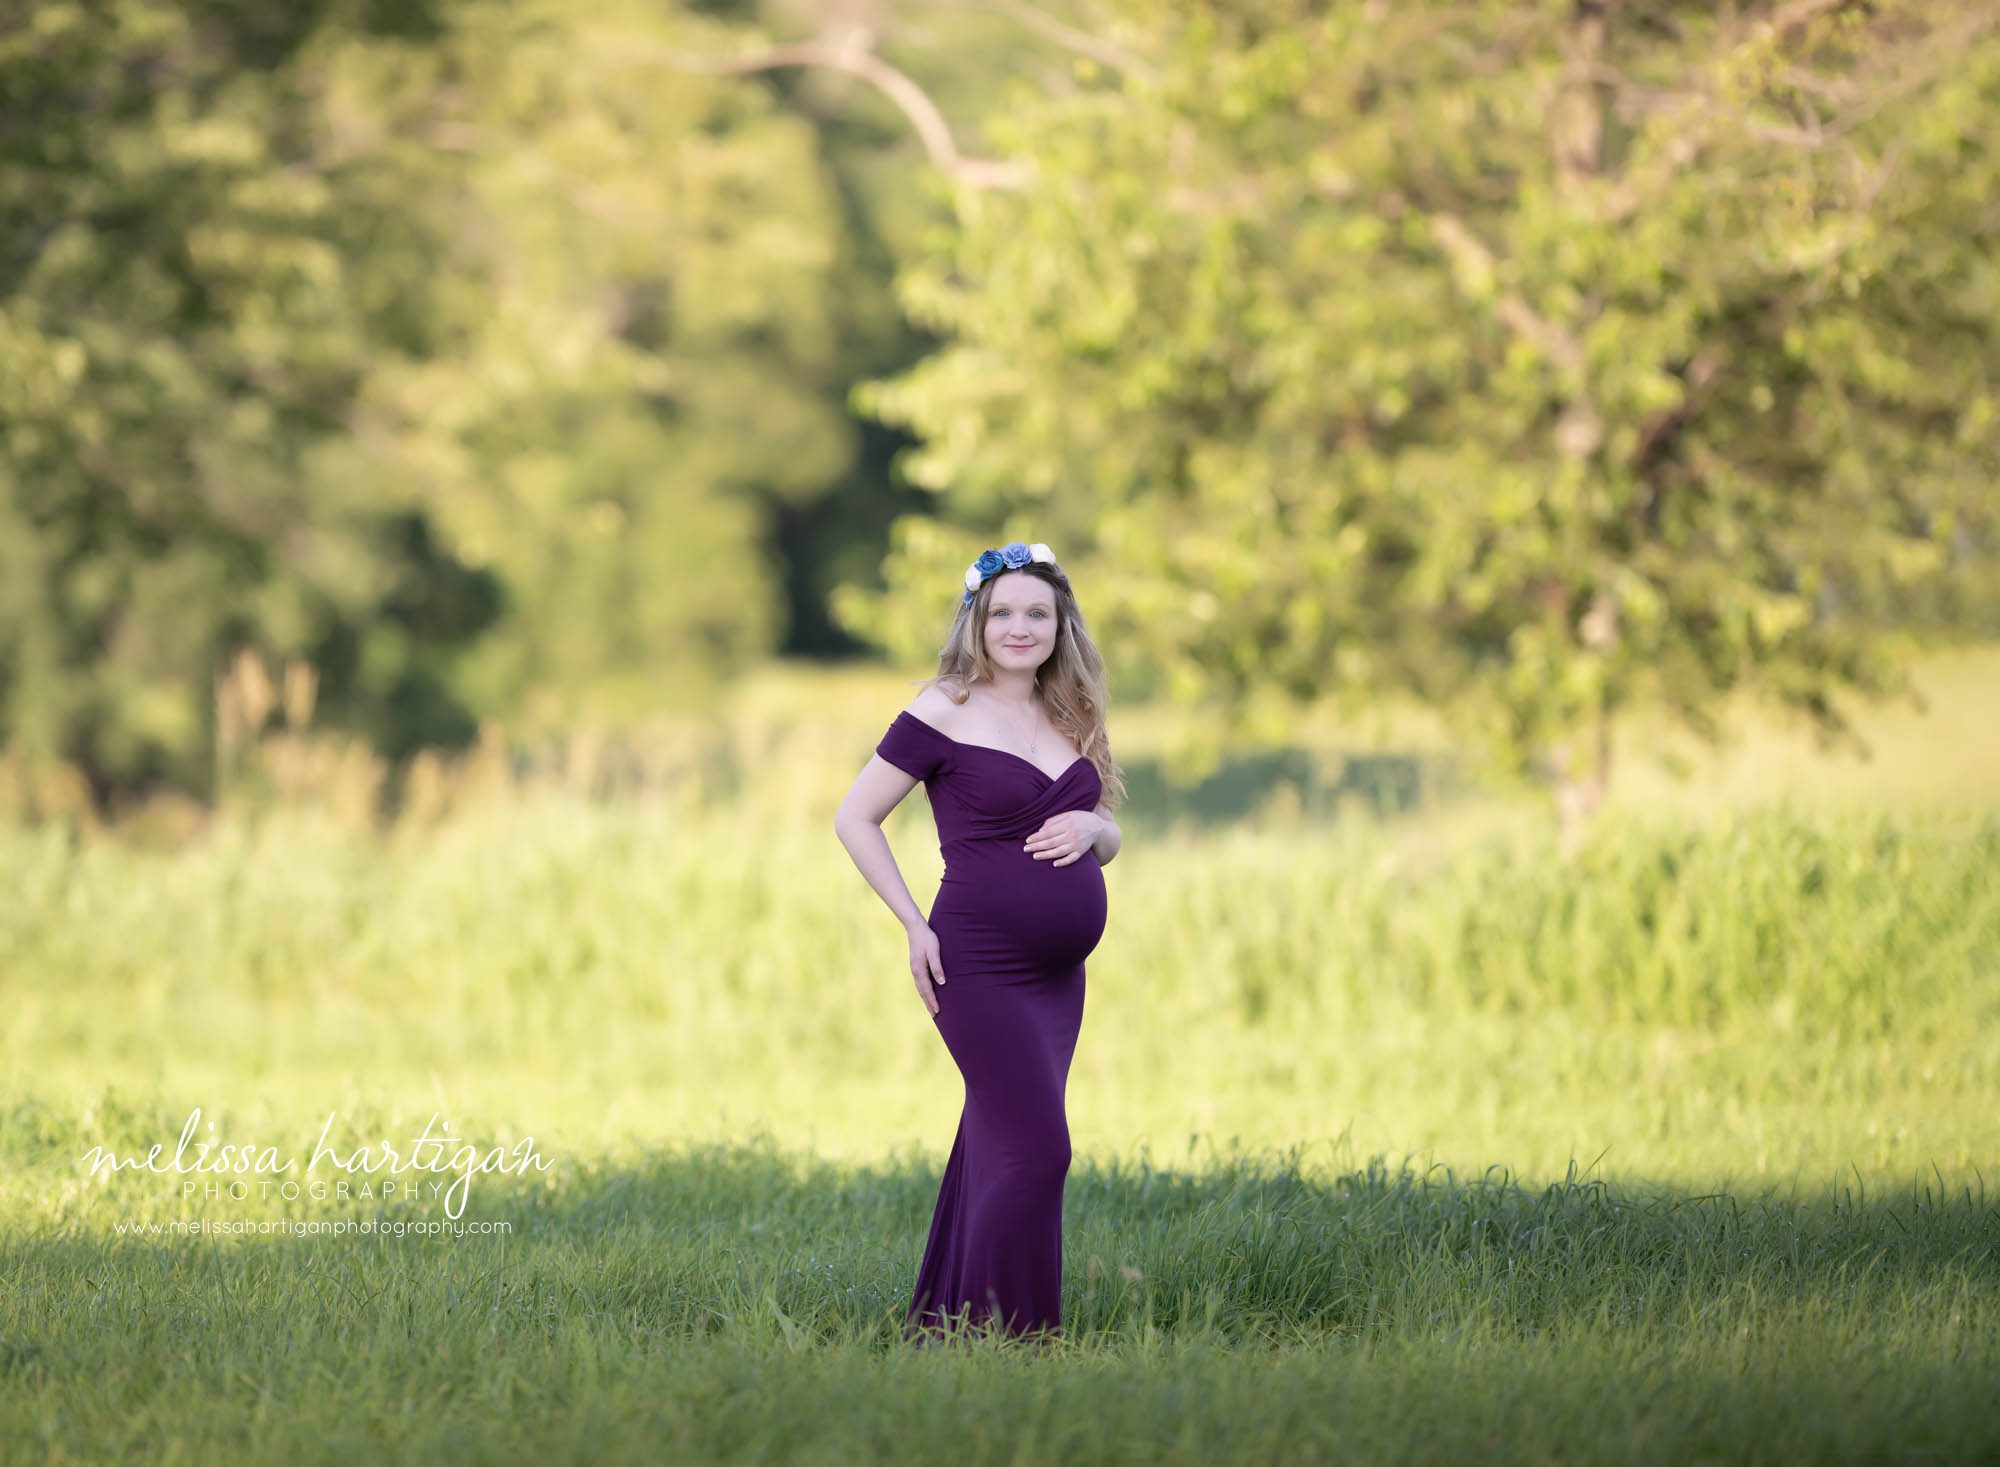 expectant mom-to-be wearing love fitted purple gown Maternity photographer CT